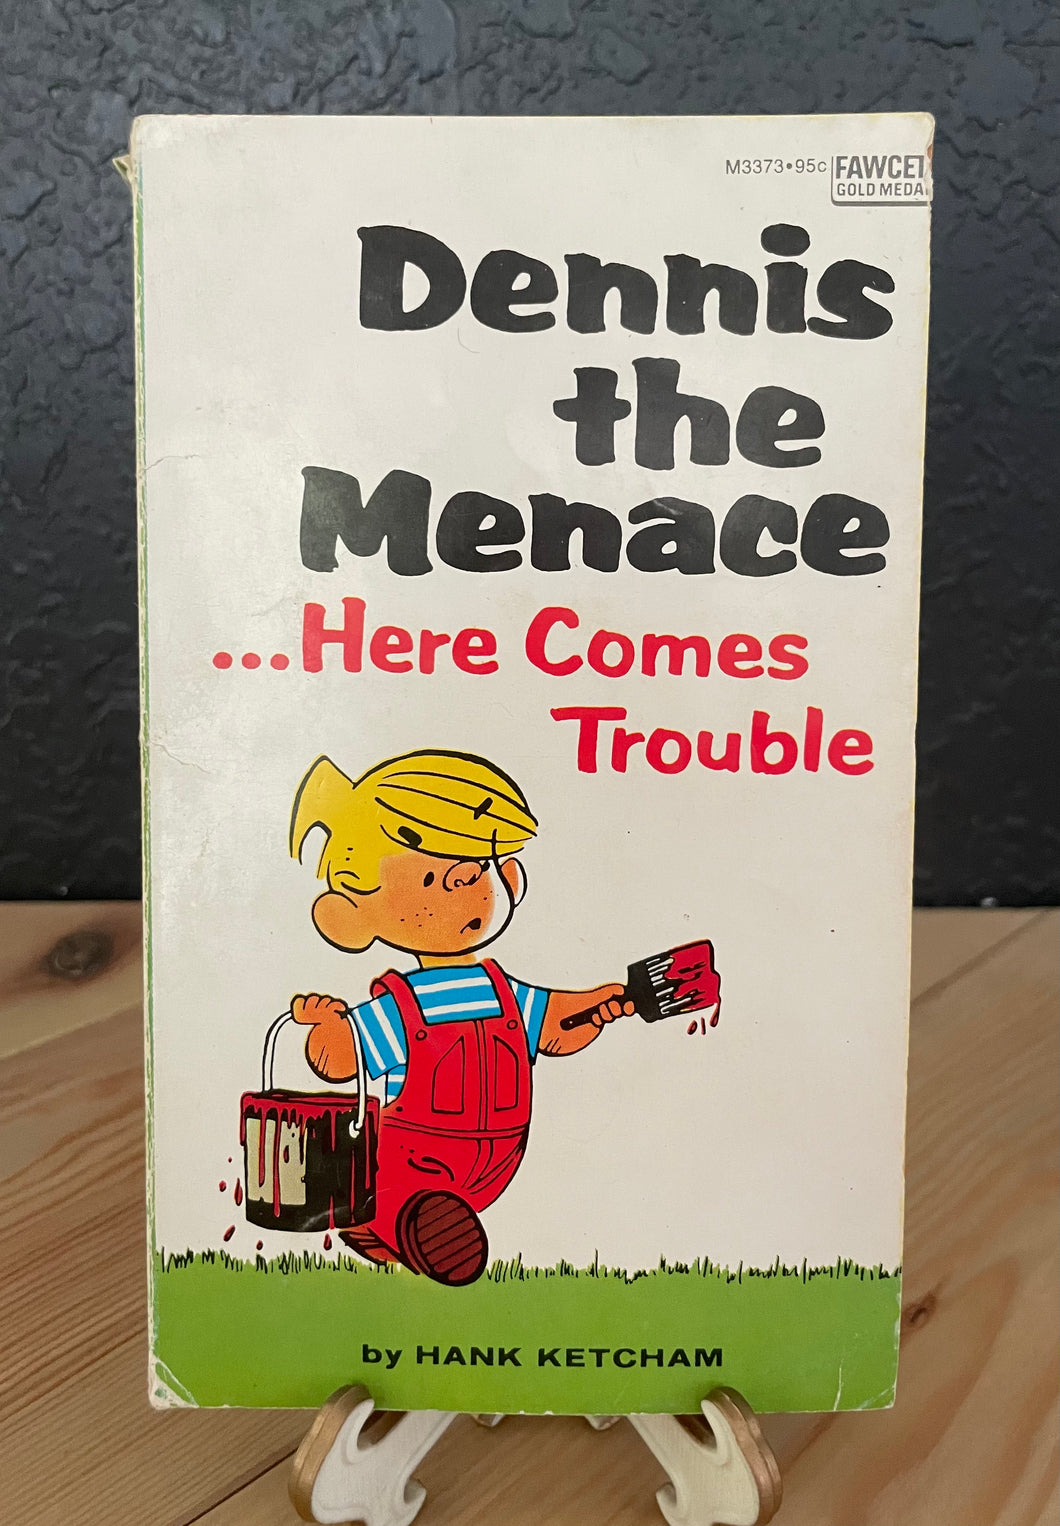 1966 “Dennis the Menace, Here Comes Trouble” Vintage Paperback Book